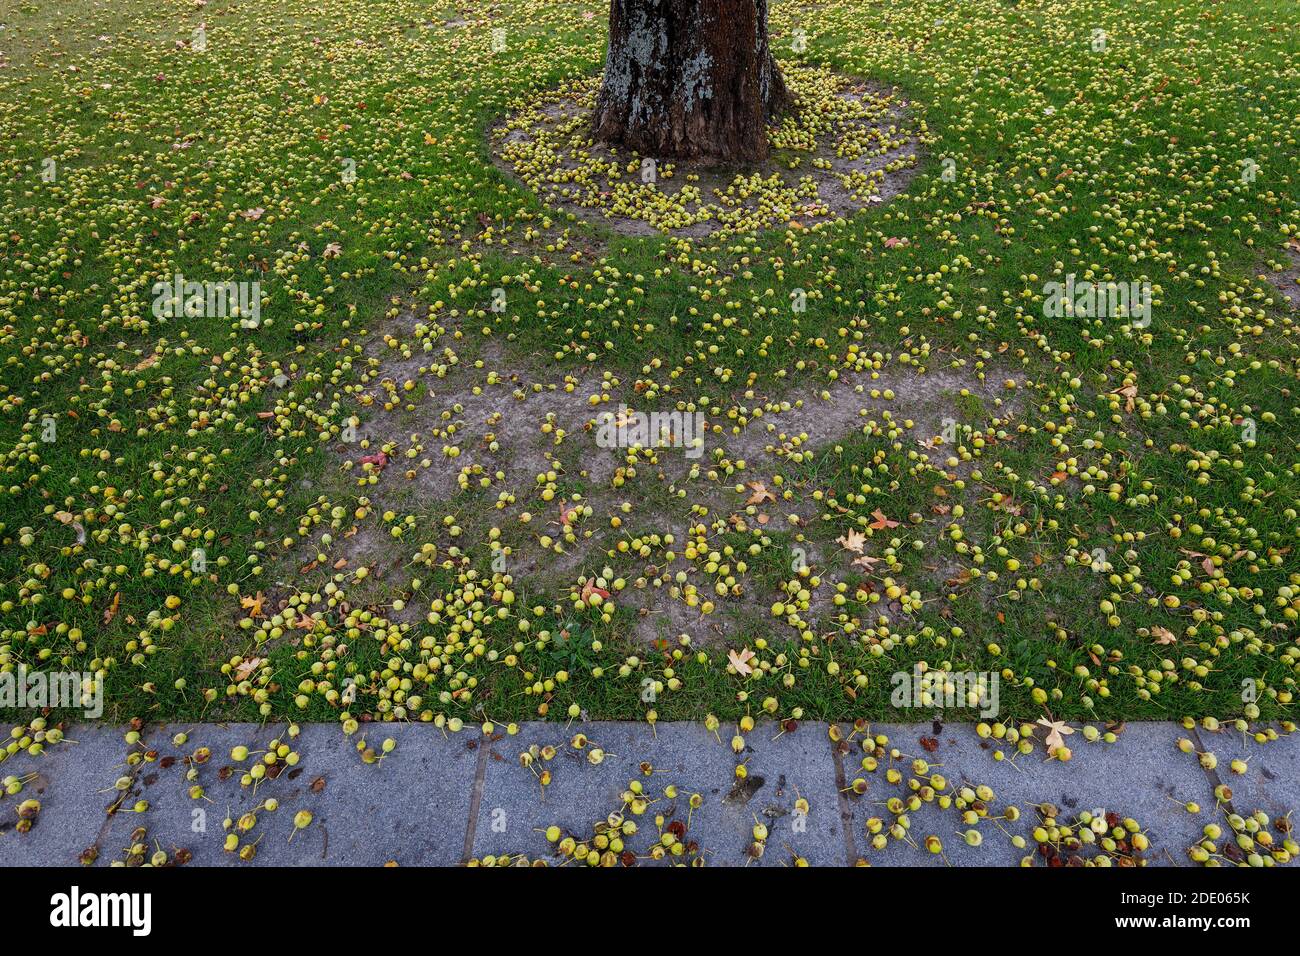 Crabapple tree fruit fallen on the grass with the tree trunk at the top of picture. Christchurch, New Zealand. Stock Photo